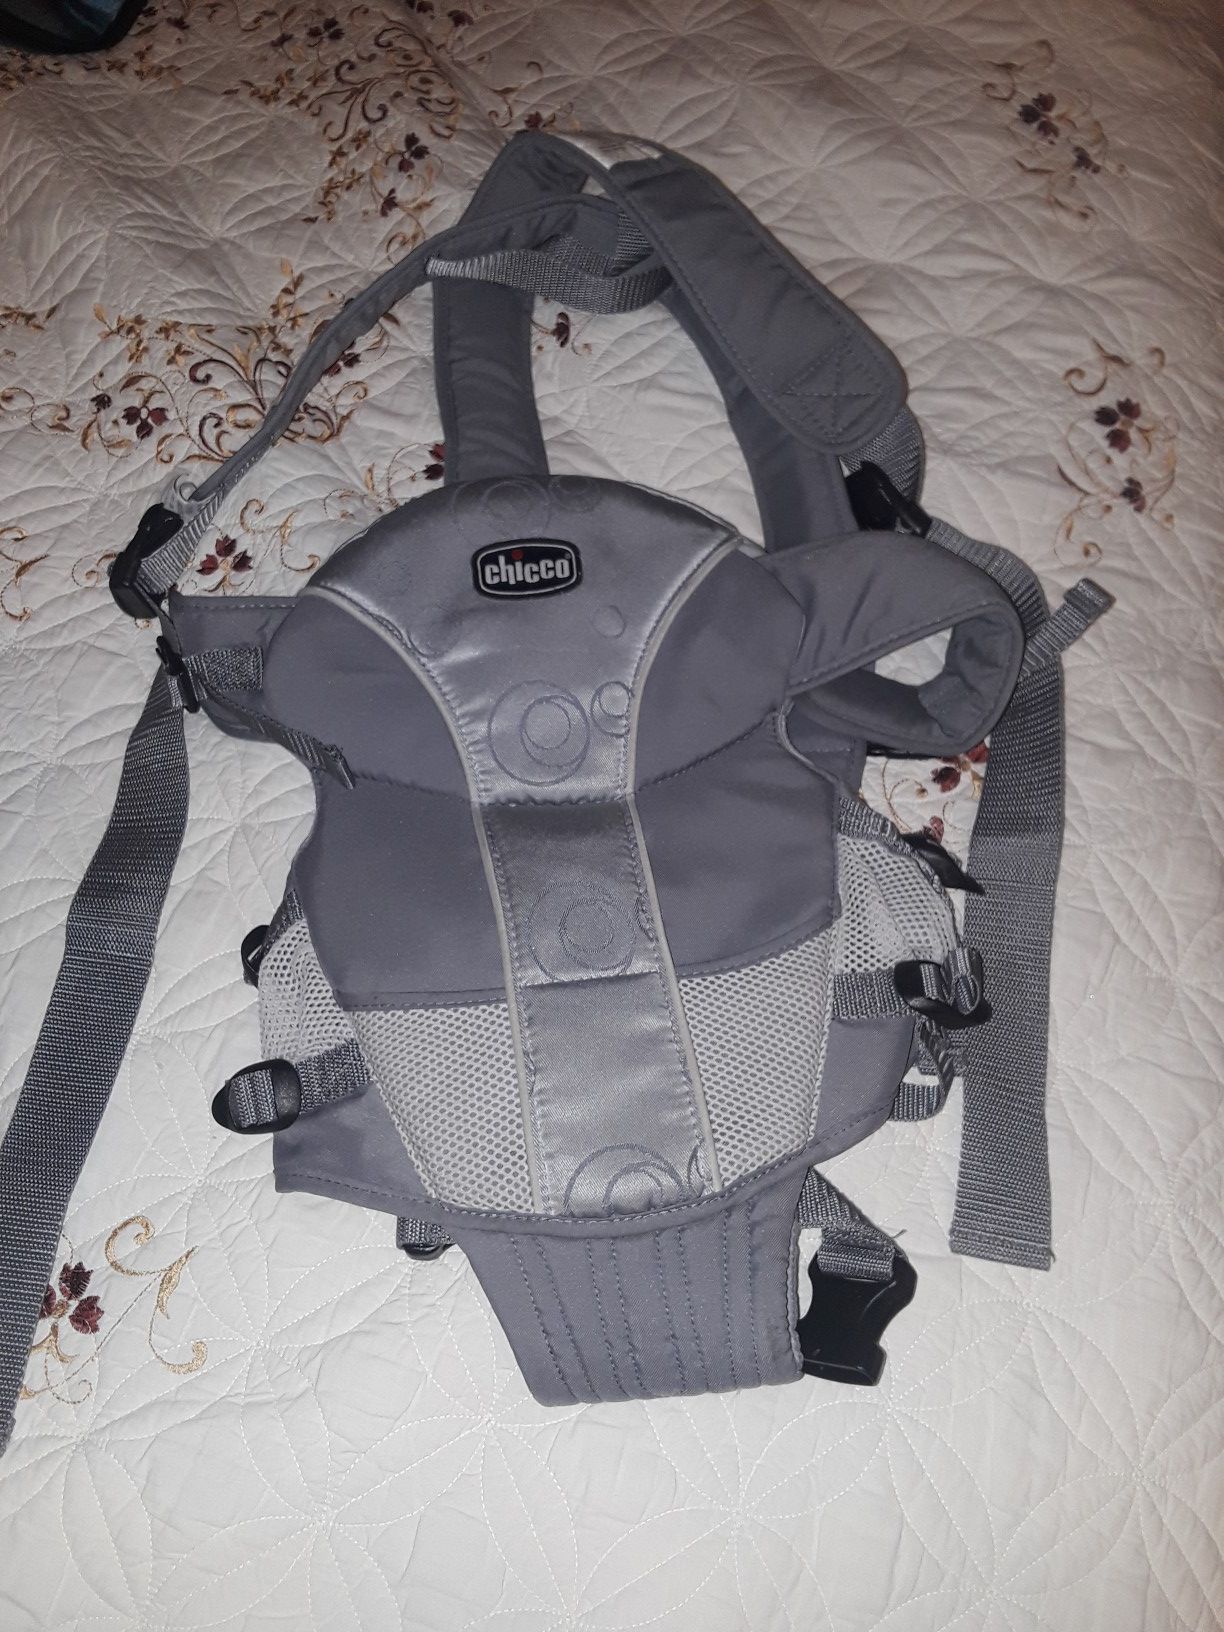 Chicco, baby carrier,